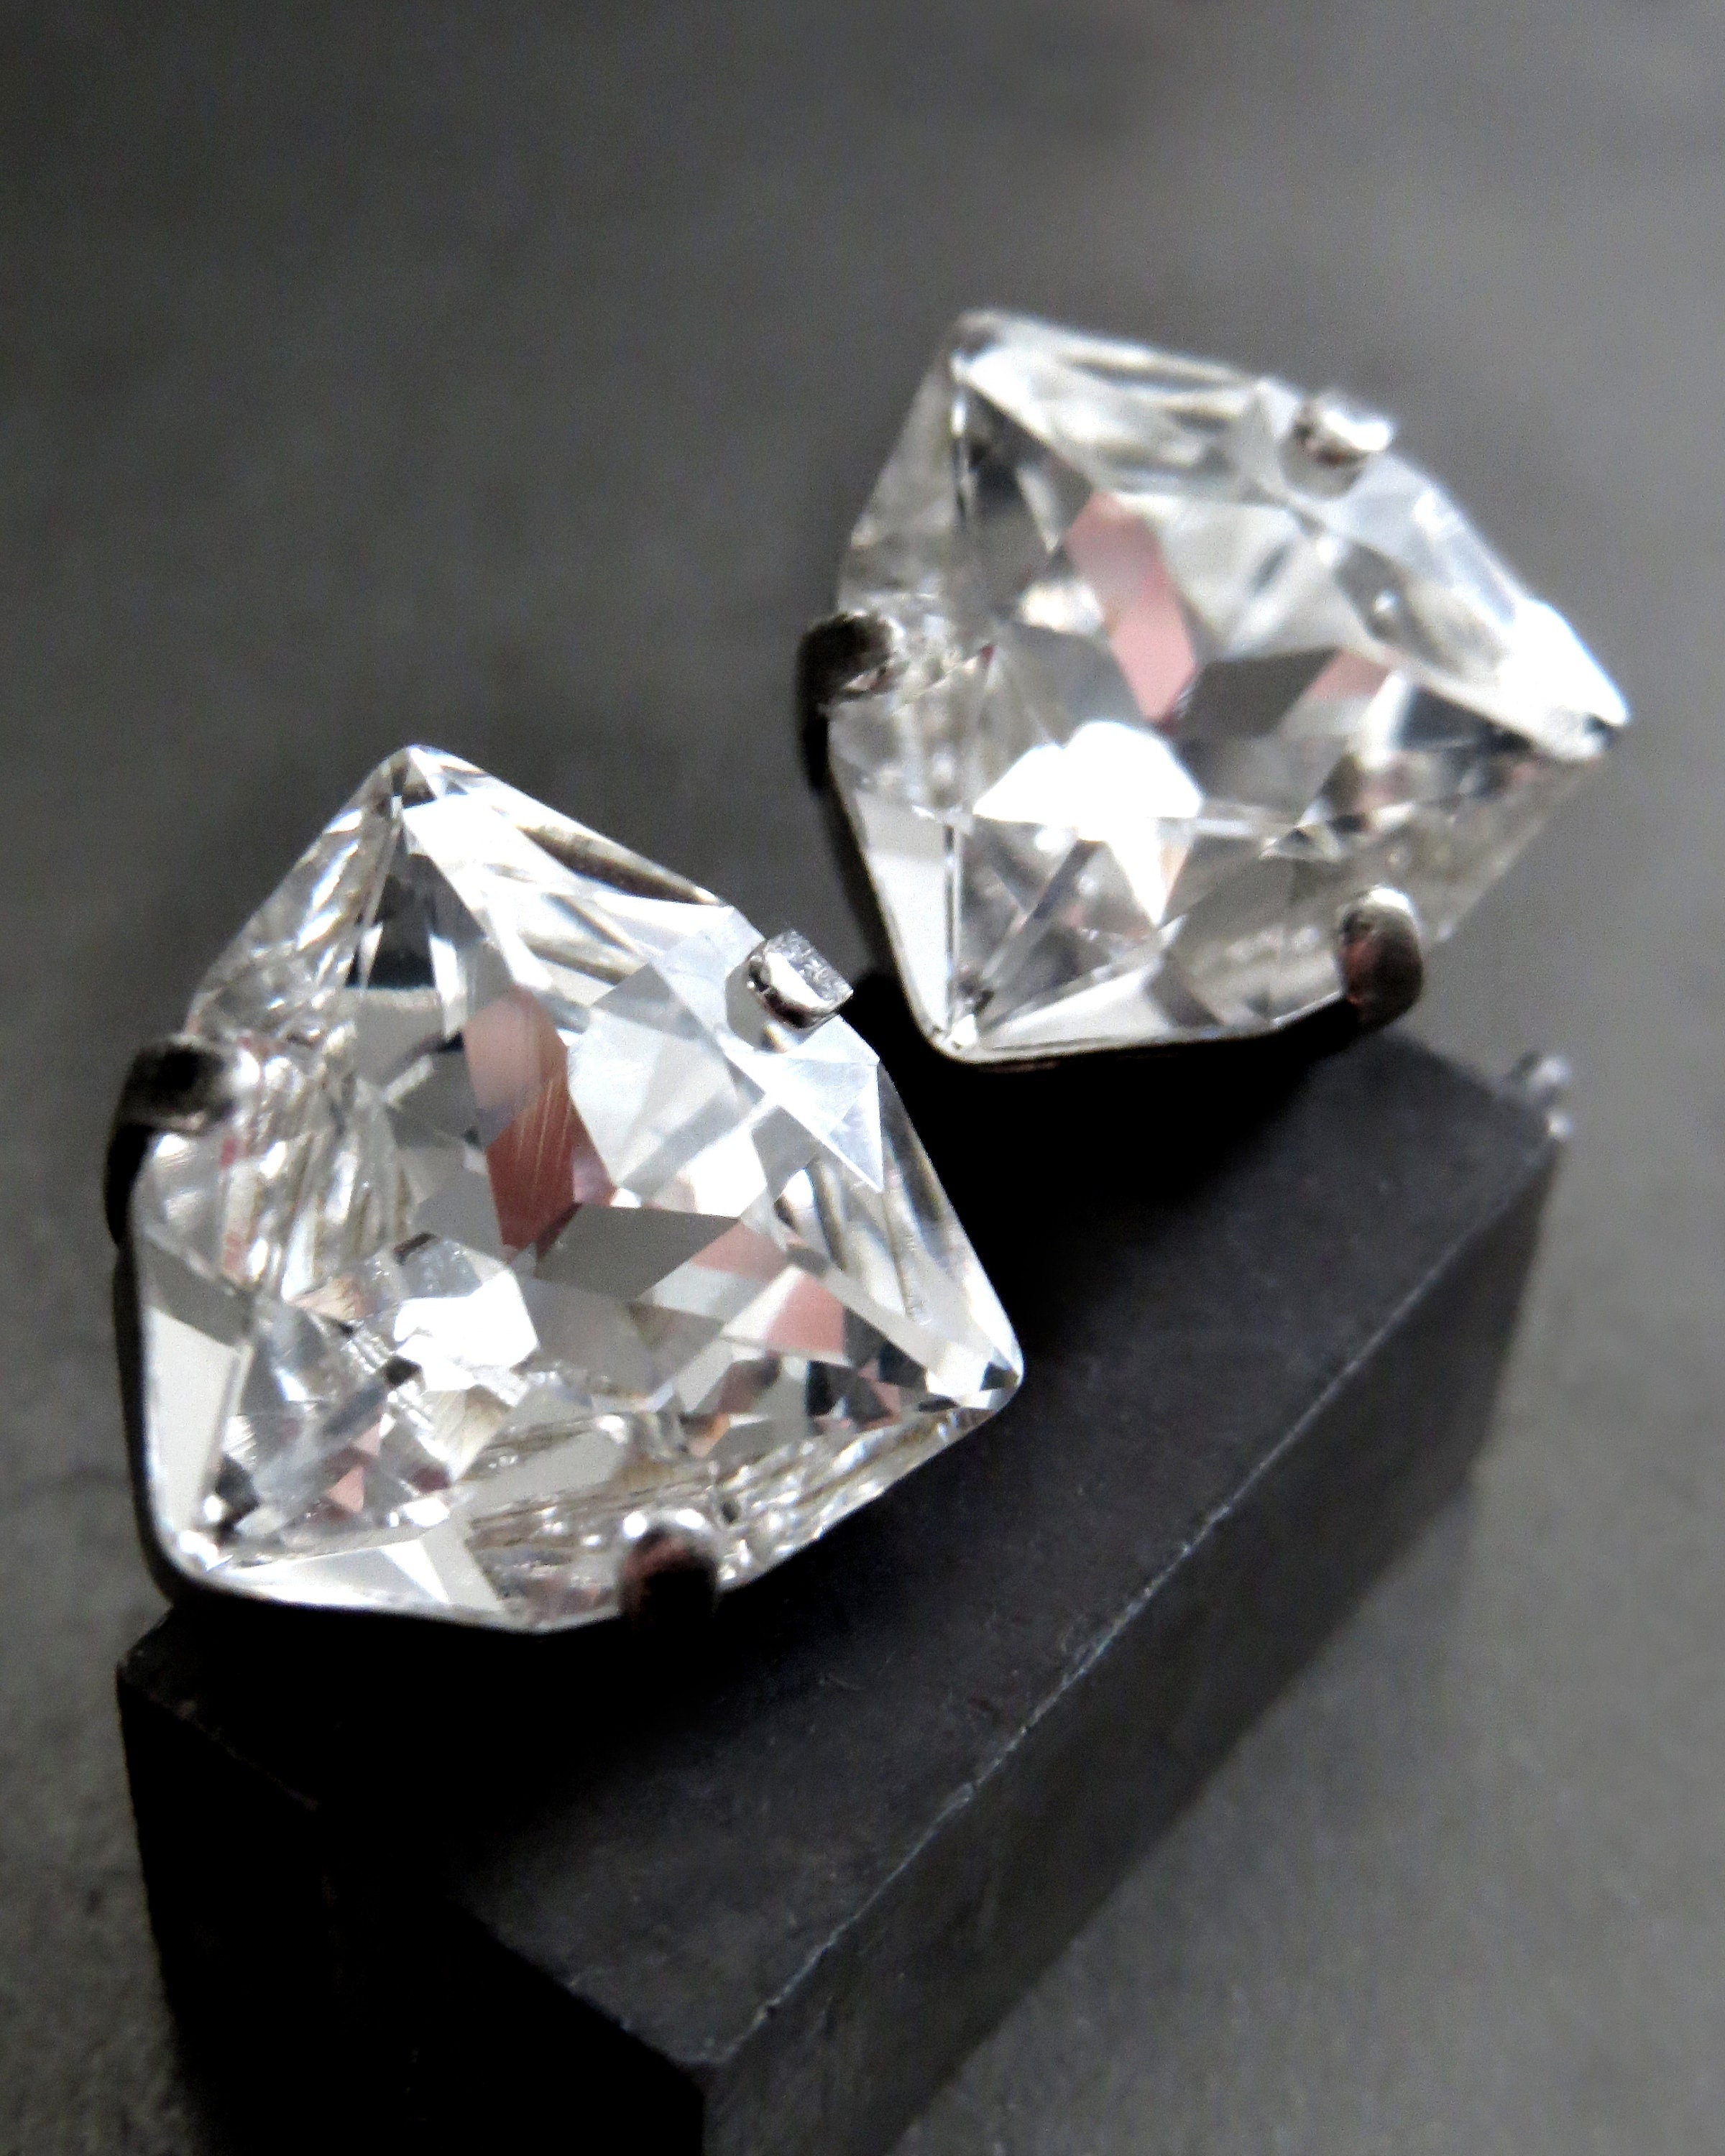 STAR DUST - Large Trilliant Clear Crystal Stud Earrings, Triangle Sparkly Clear Crystal Post Studs, 2 Size Options: Large and Small Studs